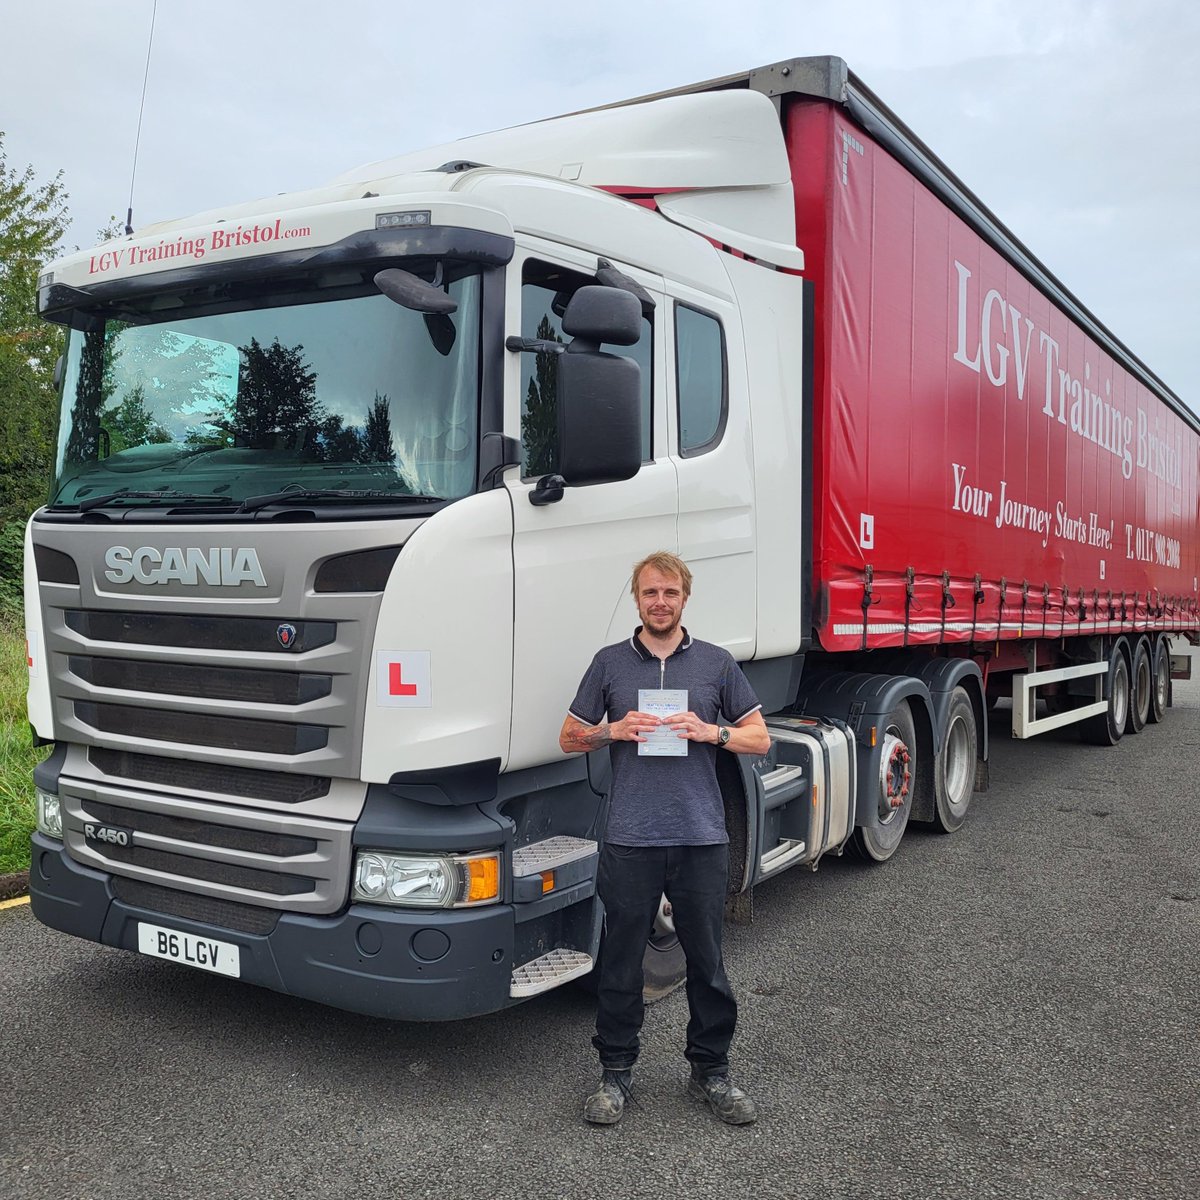 Huge congratulations to Aaron, on a well deserved first time, Cat.C+E test pass today. Keep up the safe driving mate. We wish you all the very best for the future! LGVTrainingBristol.com #YourJourneyStartsHere